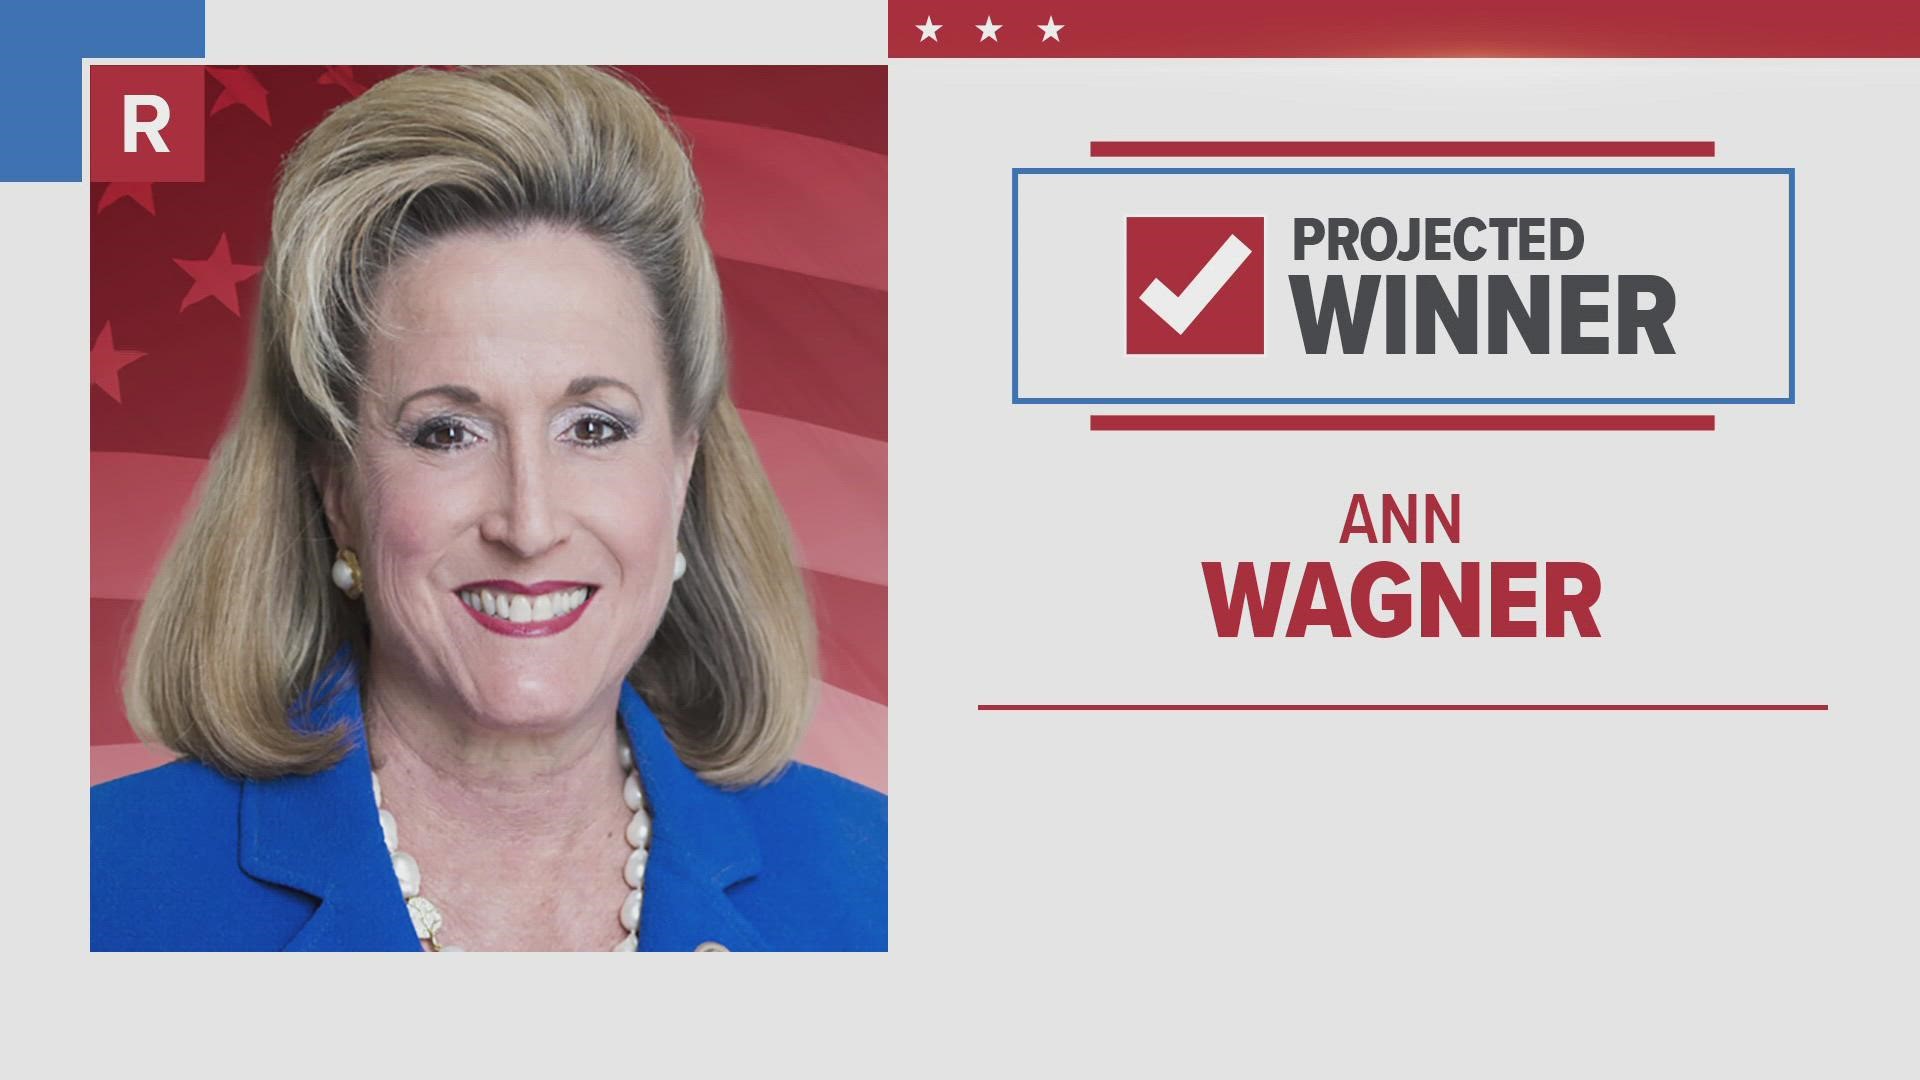 This will be Wagner's 6th term in the U.S. House of Representatives. District 2 consists of voters in Franklin, St. Charles and St. Louis Counties.